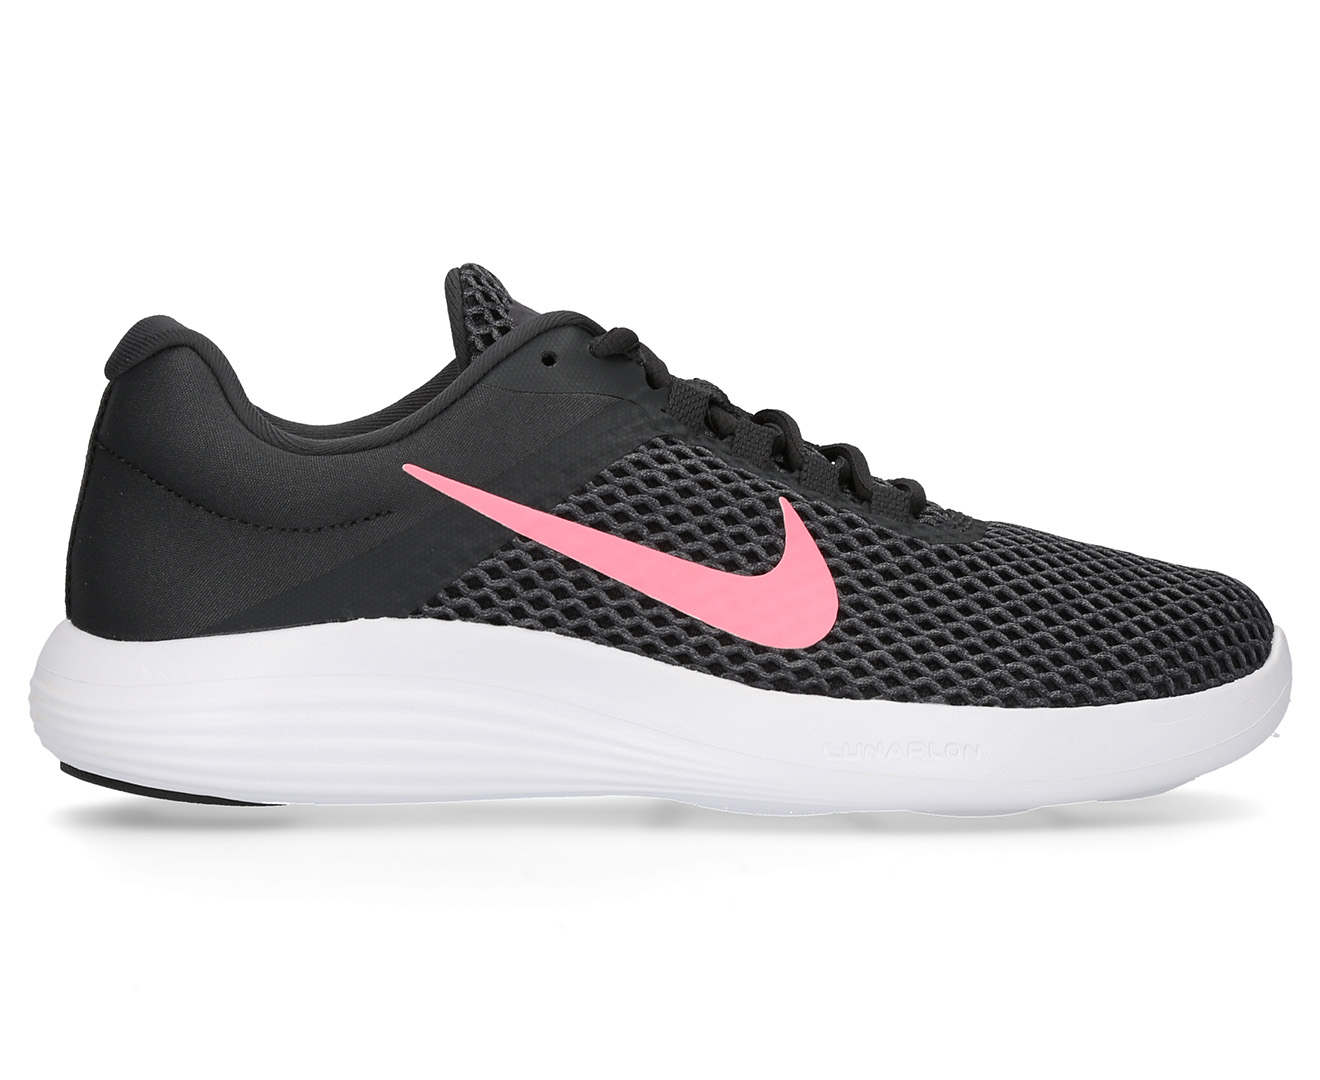 Nike Women's Lunarconverge 2 Shoe - Anthracite/Sunset Pulse | Www.catch ...